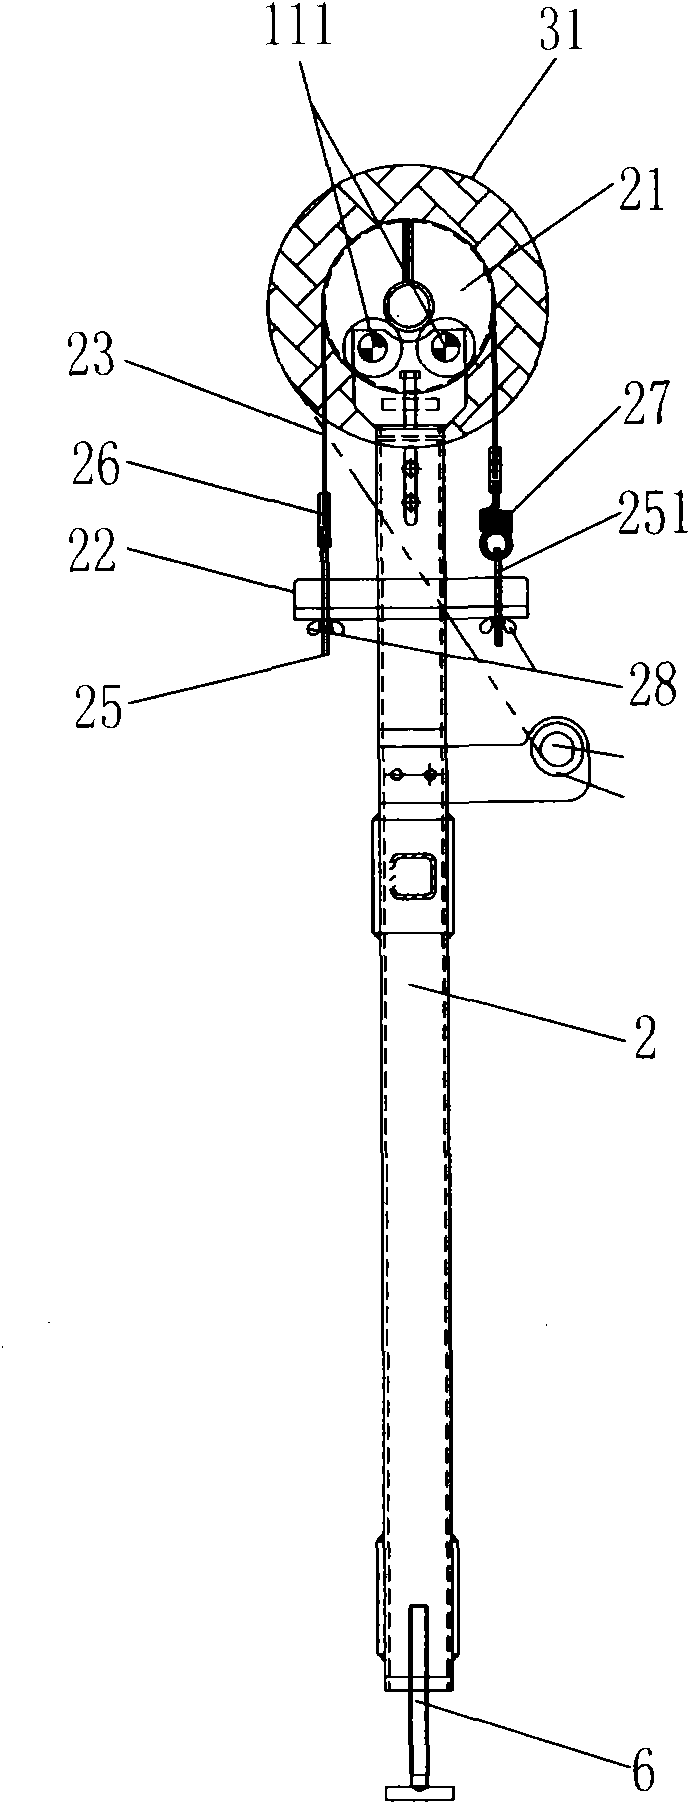 Multiaxial material returning device for cutting reinforced fabric